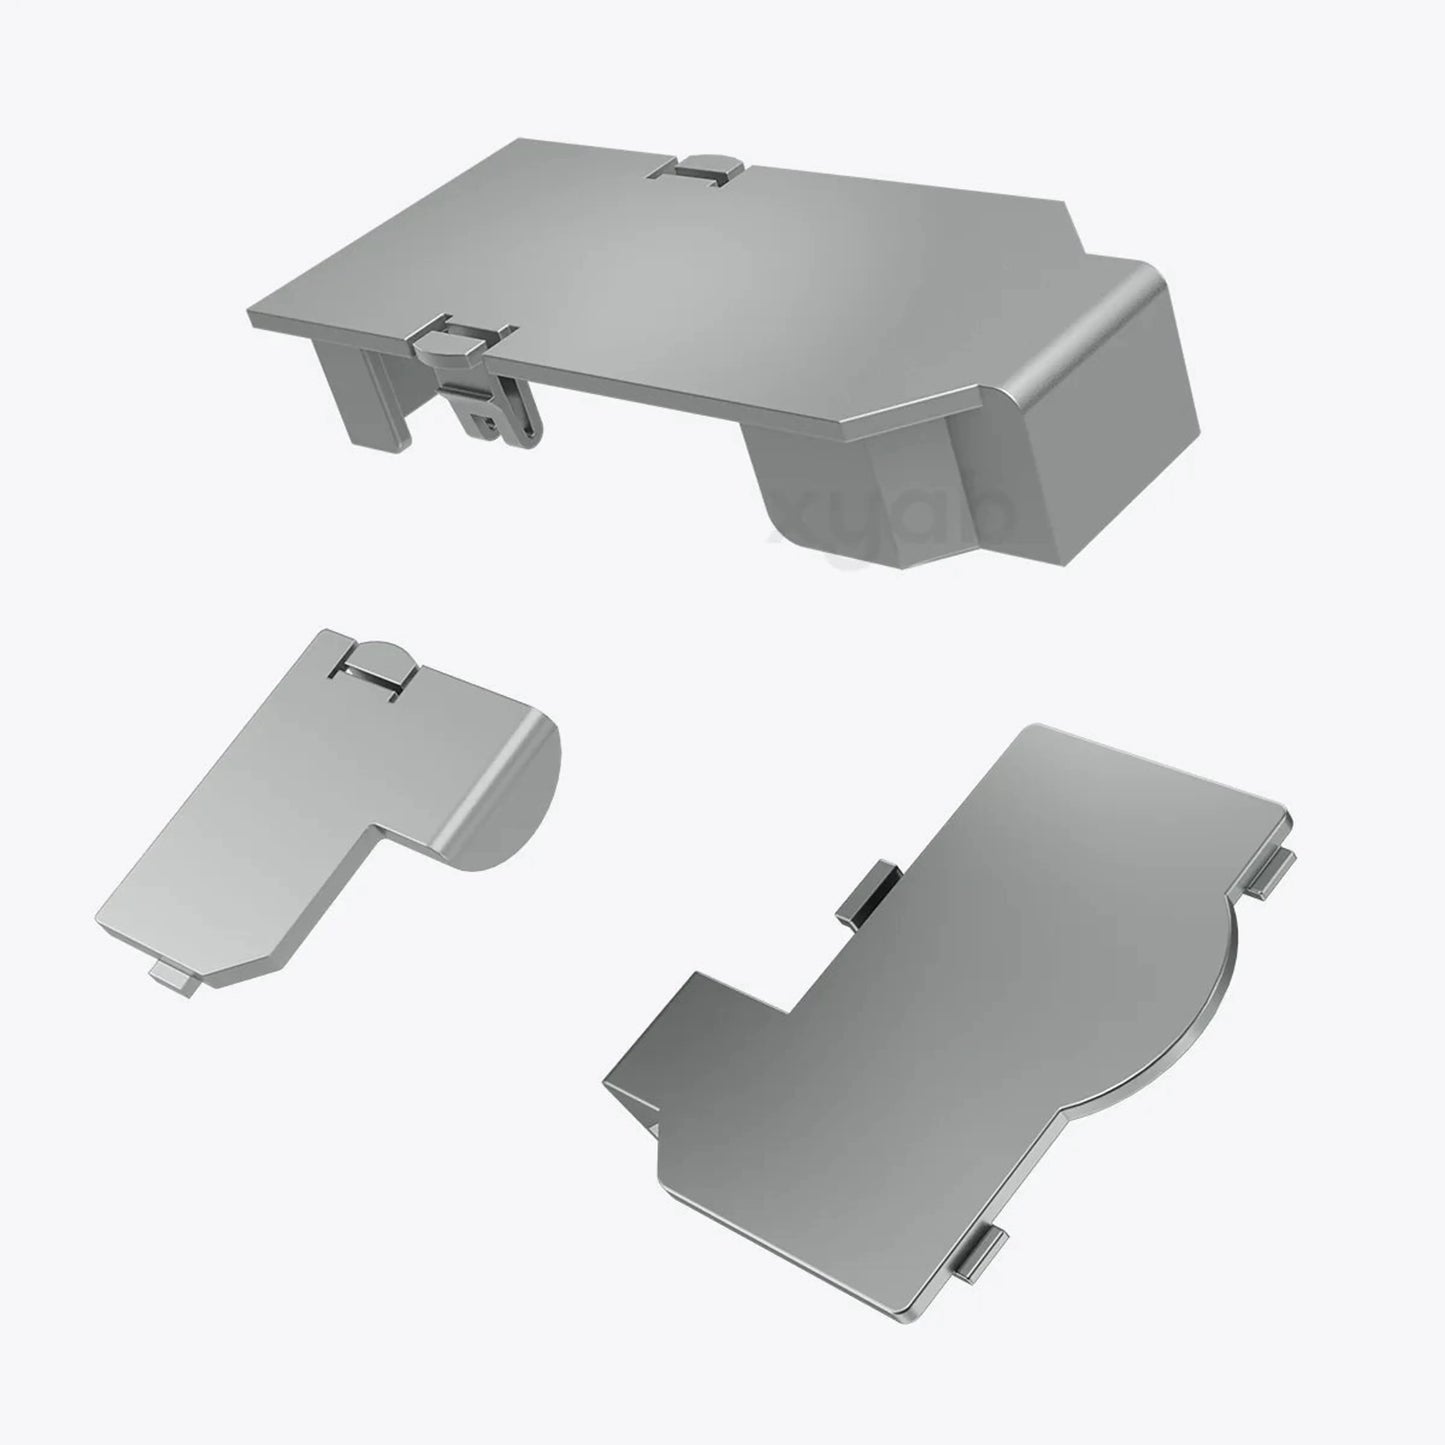 3 Piece Port Covers - Silver For Nintendo GameCube®